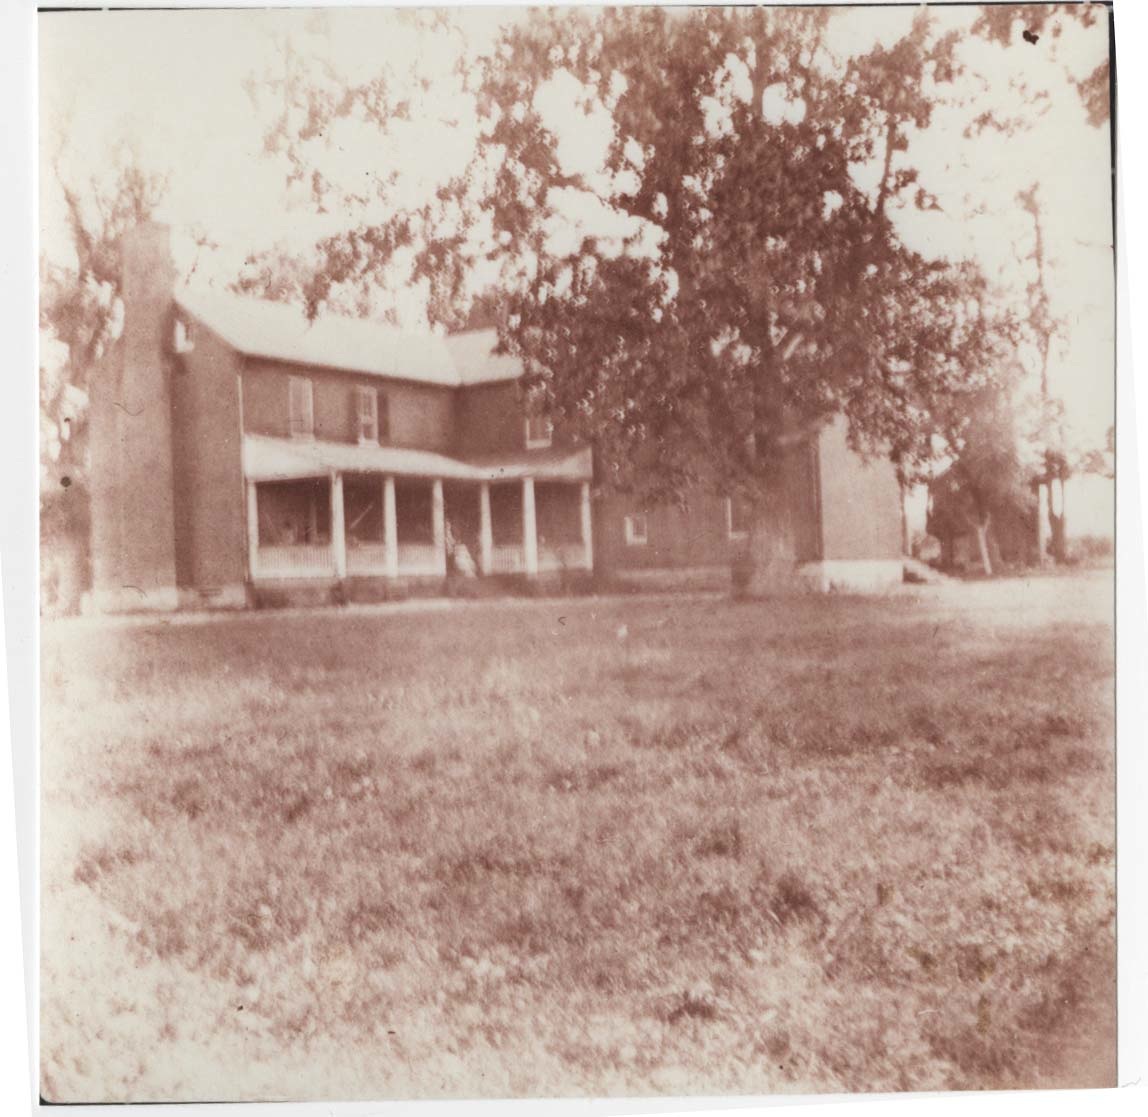 Rear view of Kentland Manor with Porch